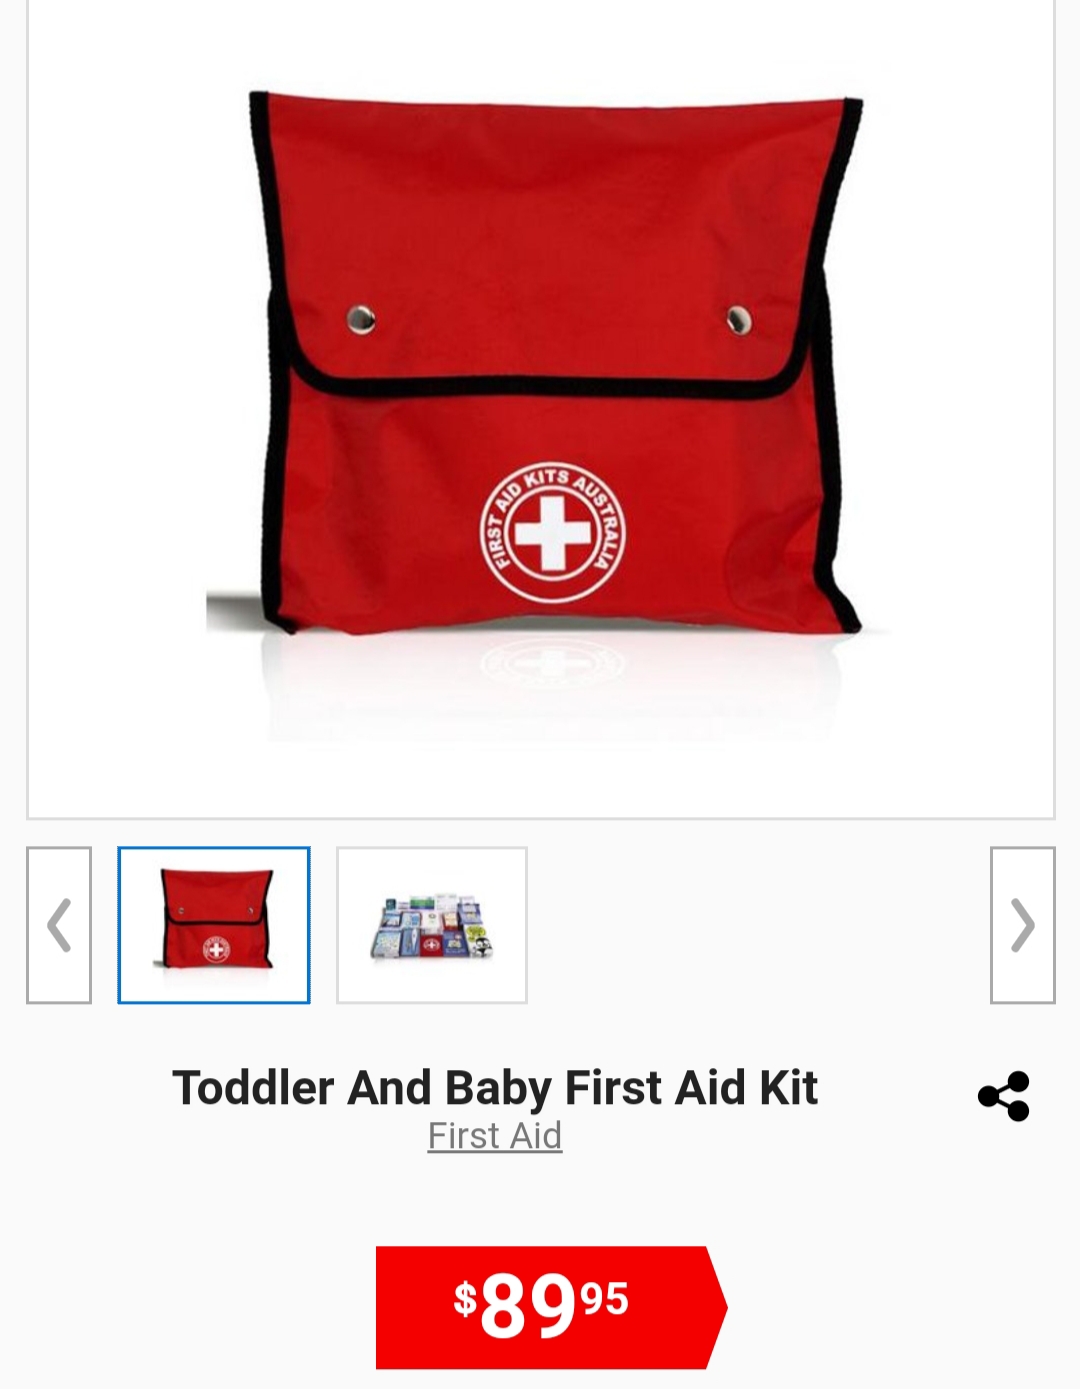 Toddler and baby first aid kit